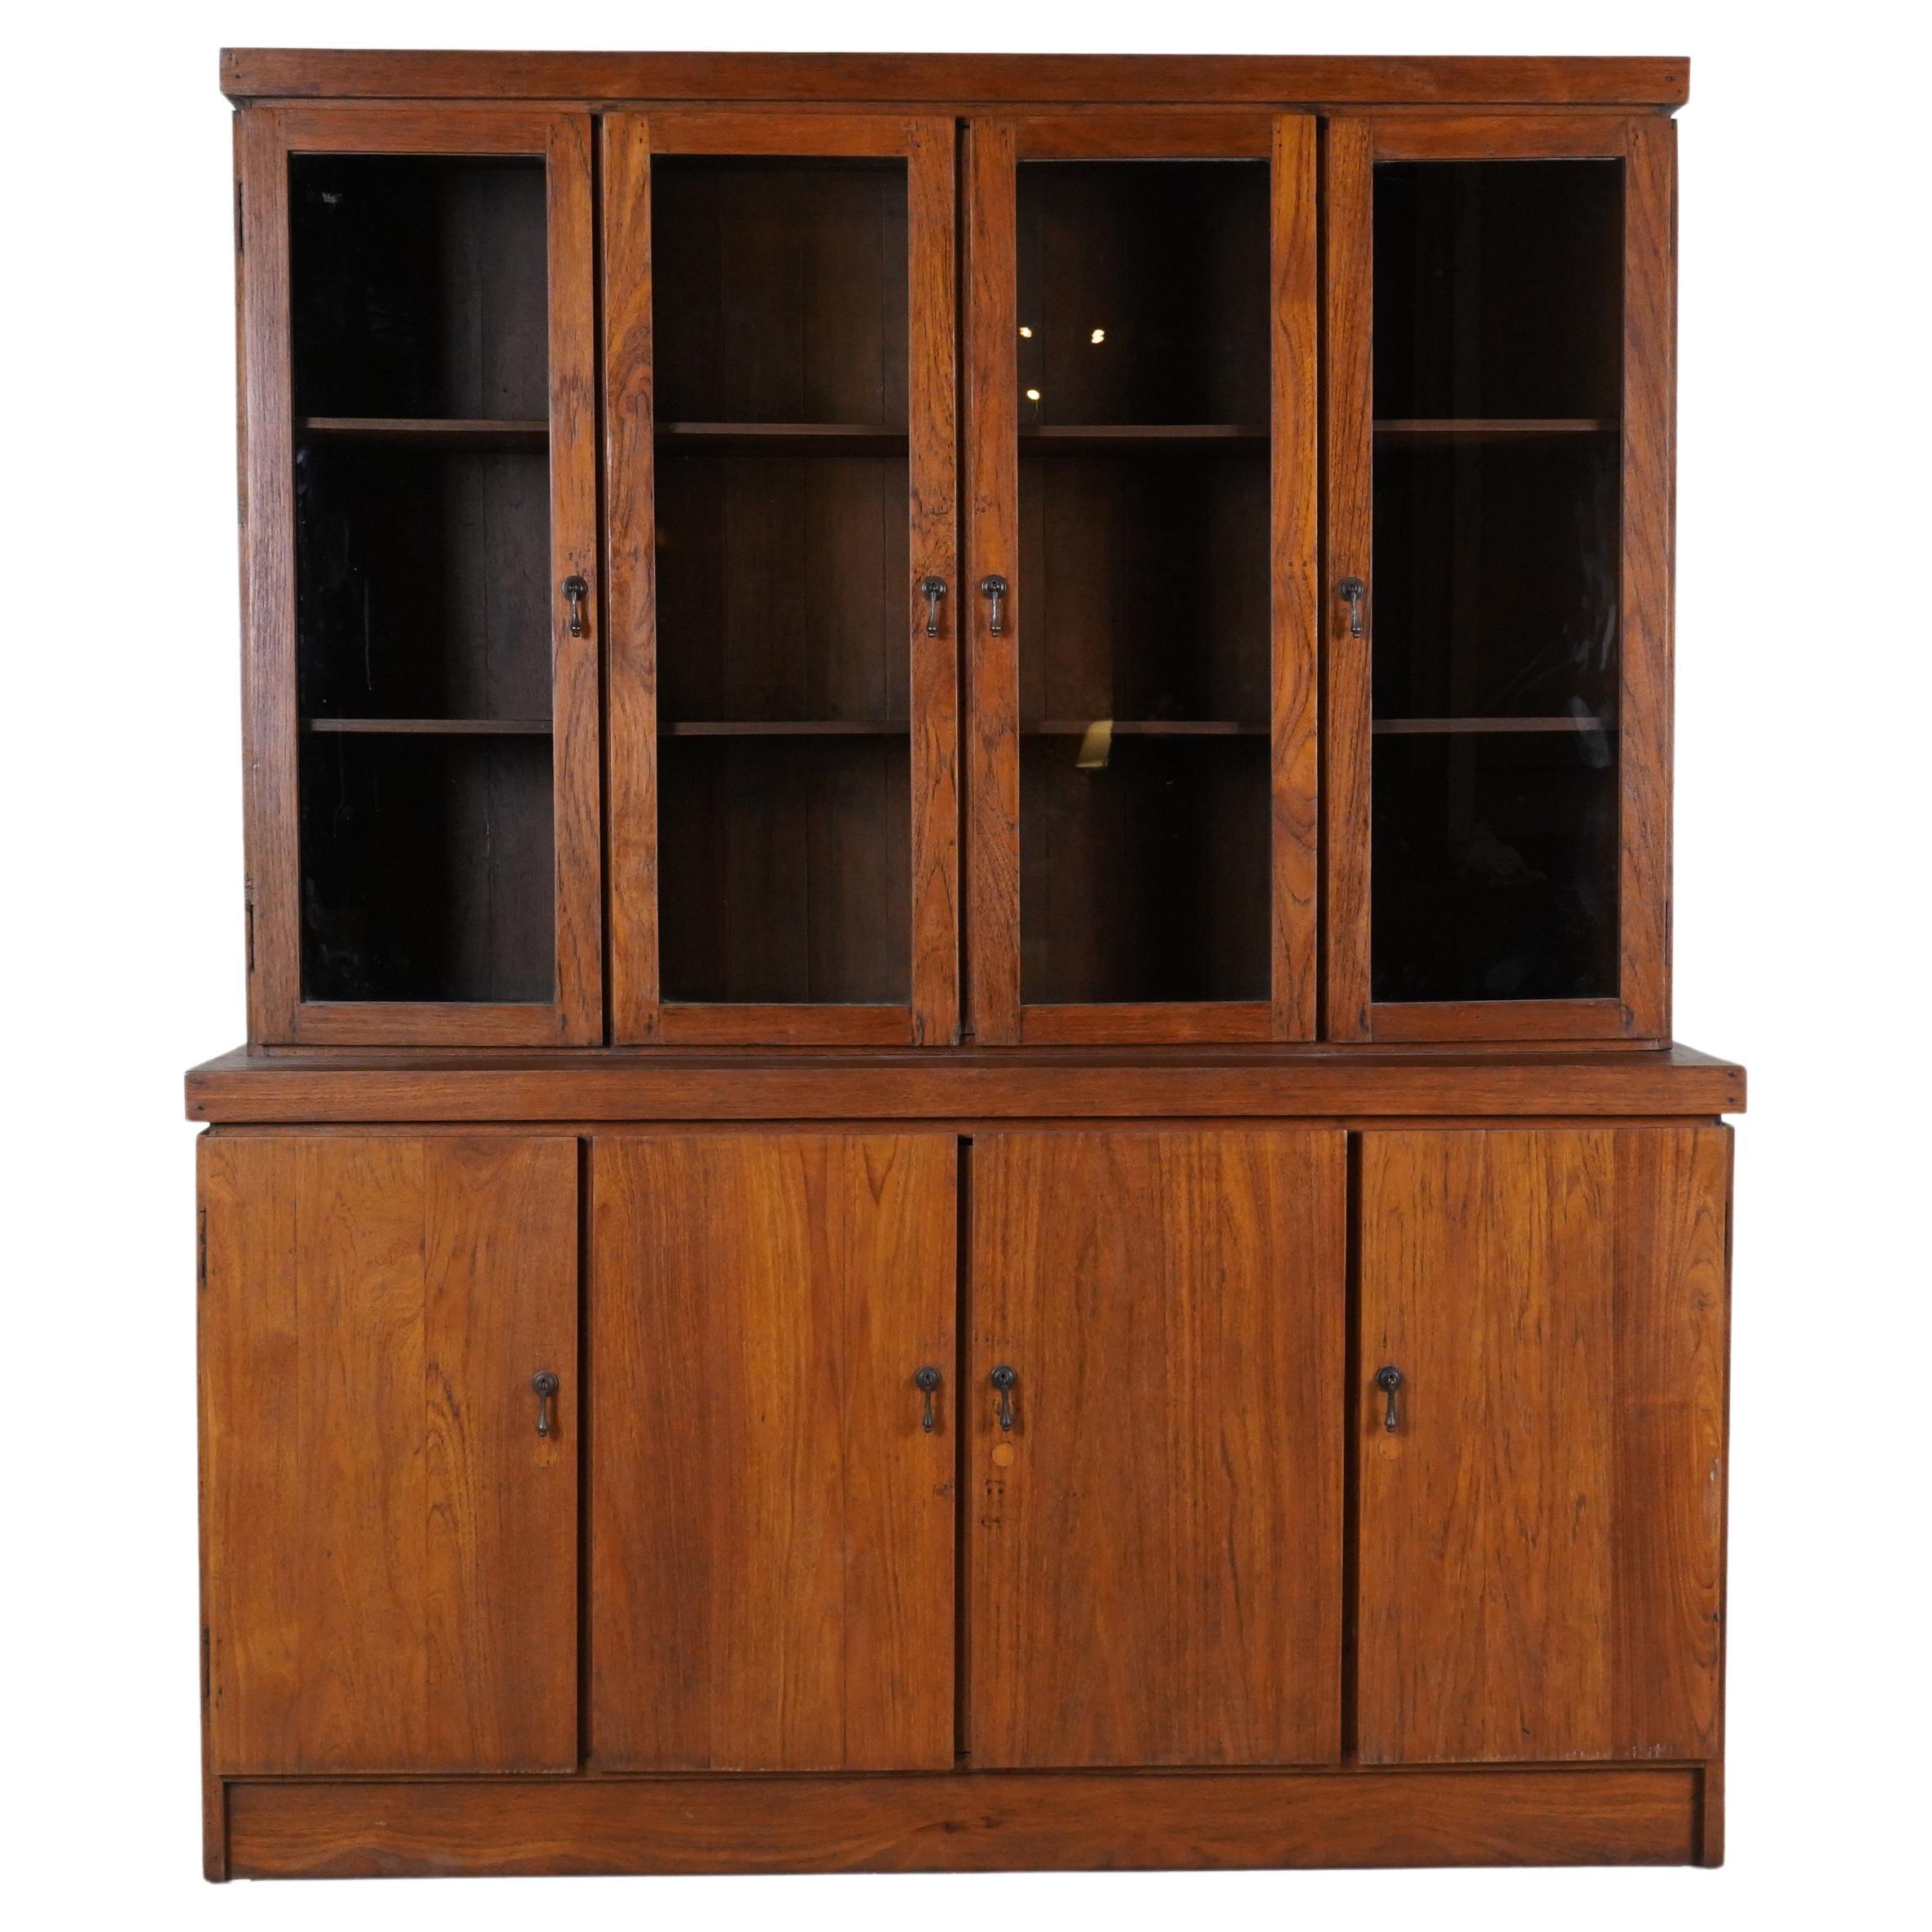 A British Colonial Bookcase with Bottom Storage For Sale